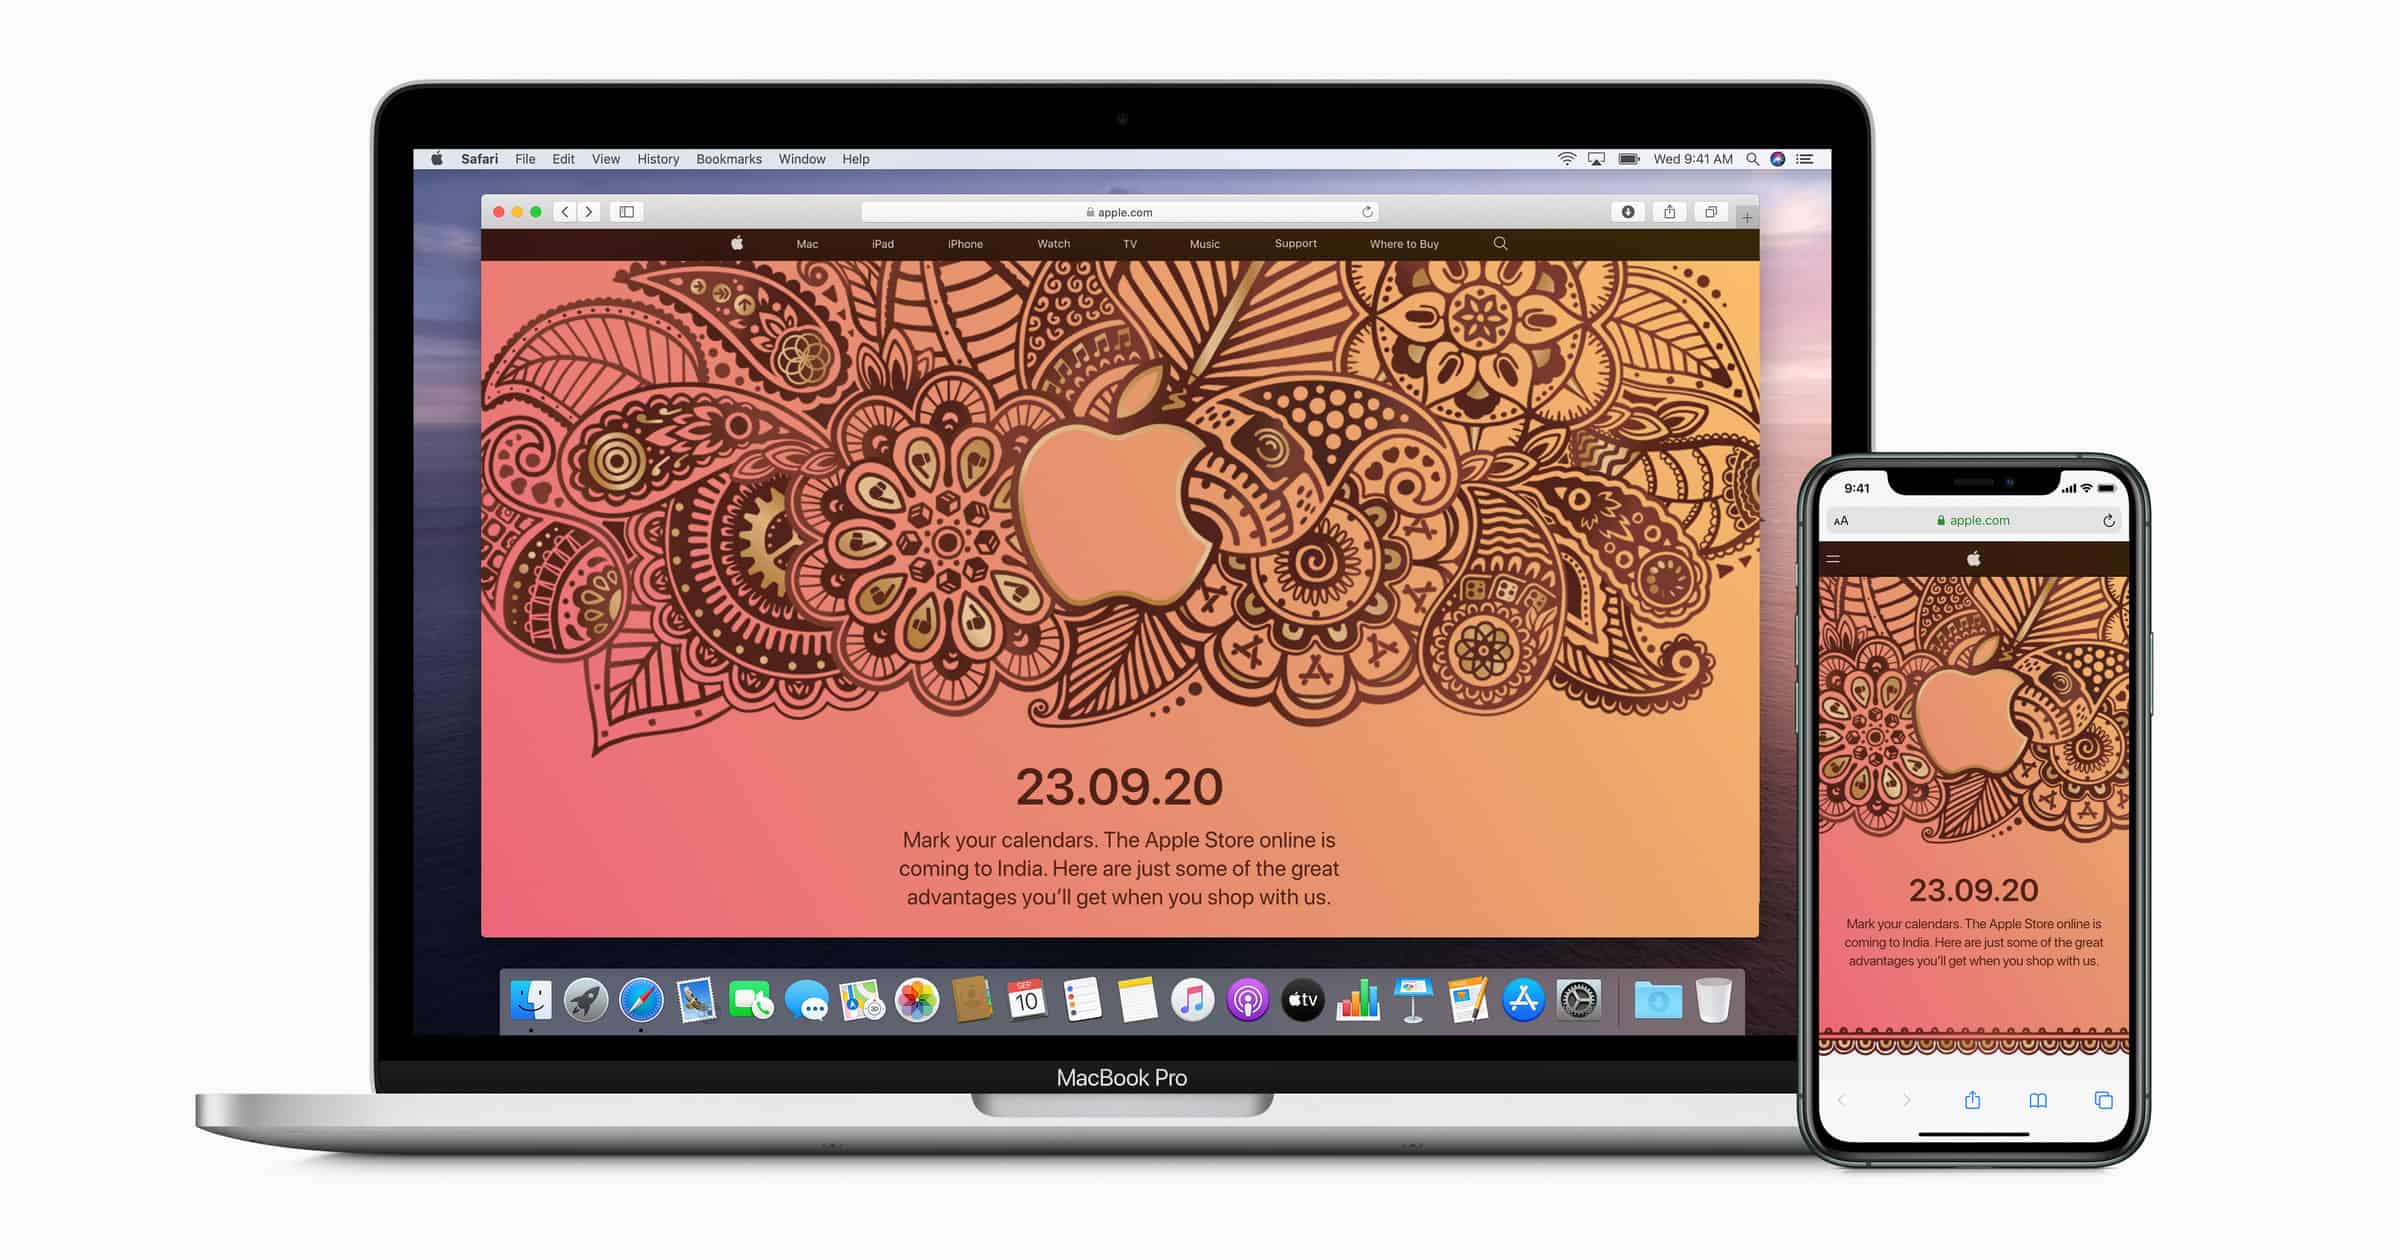 Apple Store online launching in India